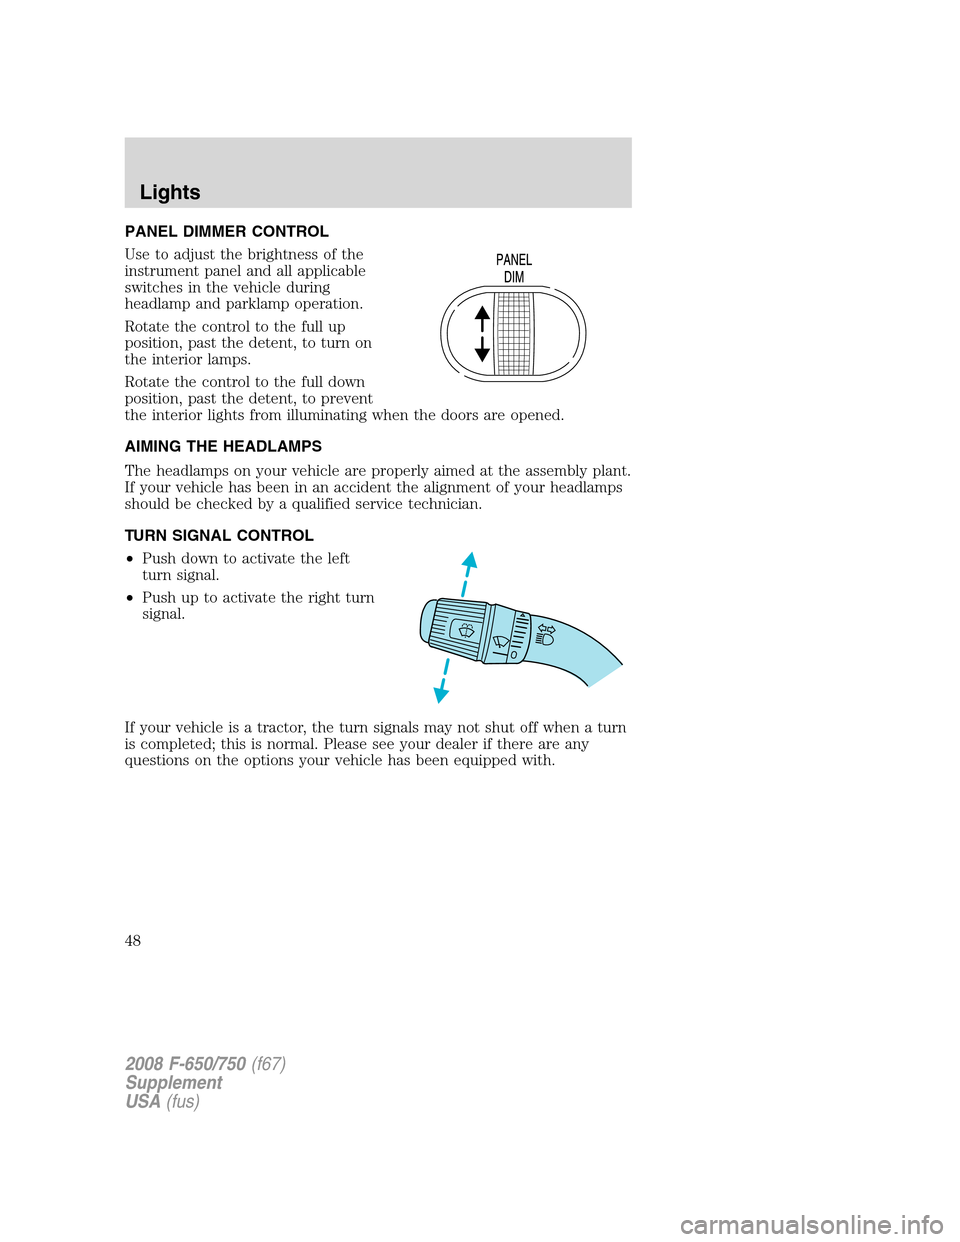 FORD F650 2008 11.G Owners Manual PANEL DIMMER CONTROL
Use to adjust the brightness of the
instrument panel and all applicable
switches in the vehicle during
headlamp and parklamp operation.
Rotate the control to the full up
position,